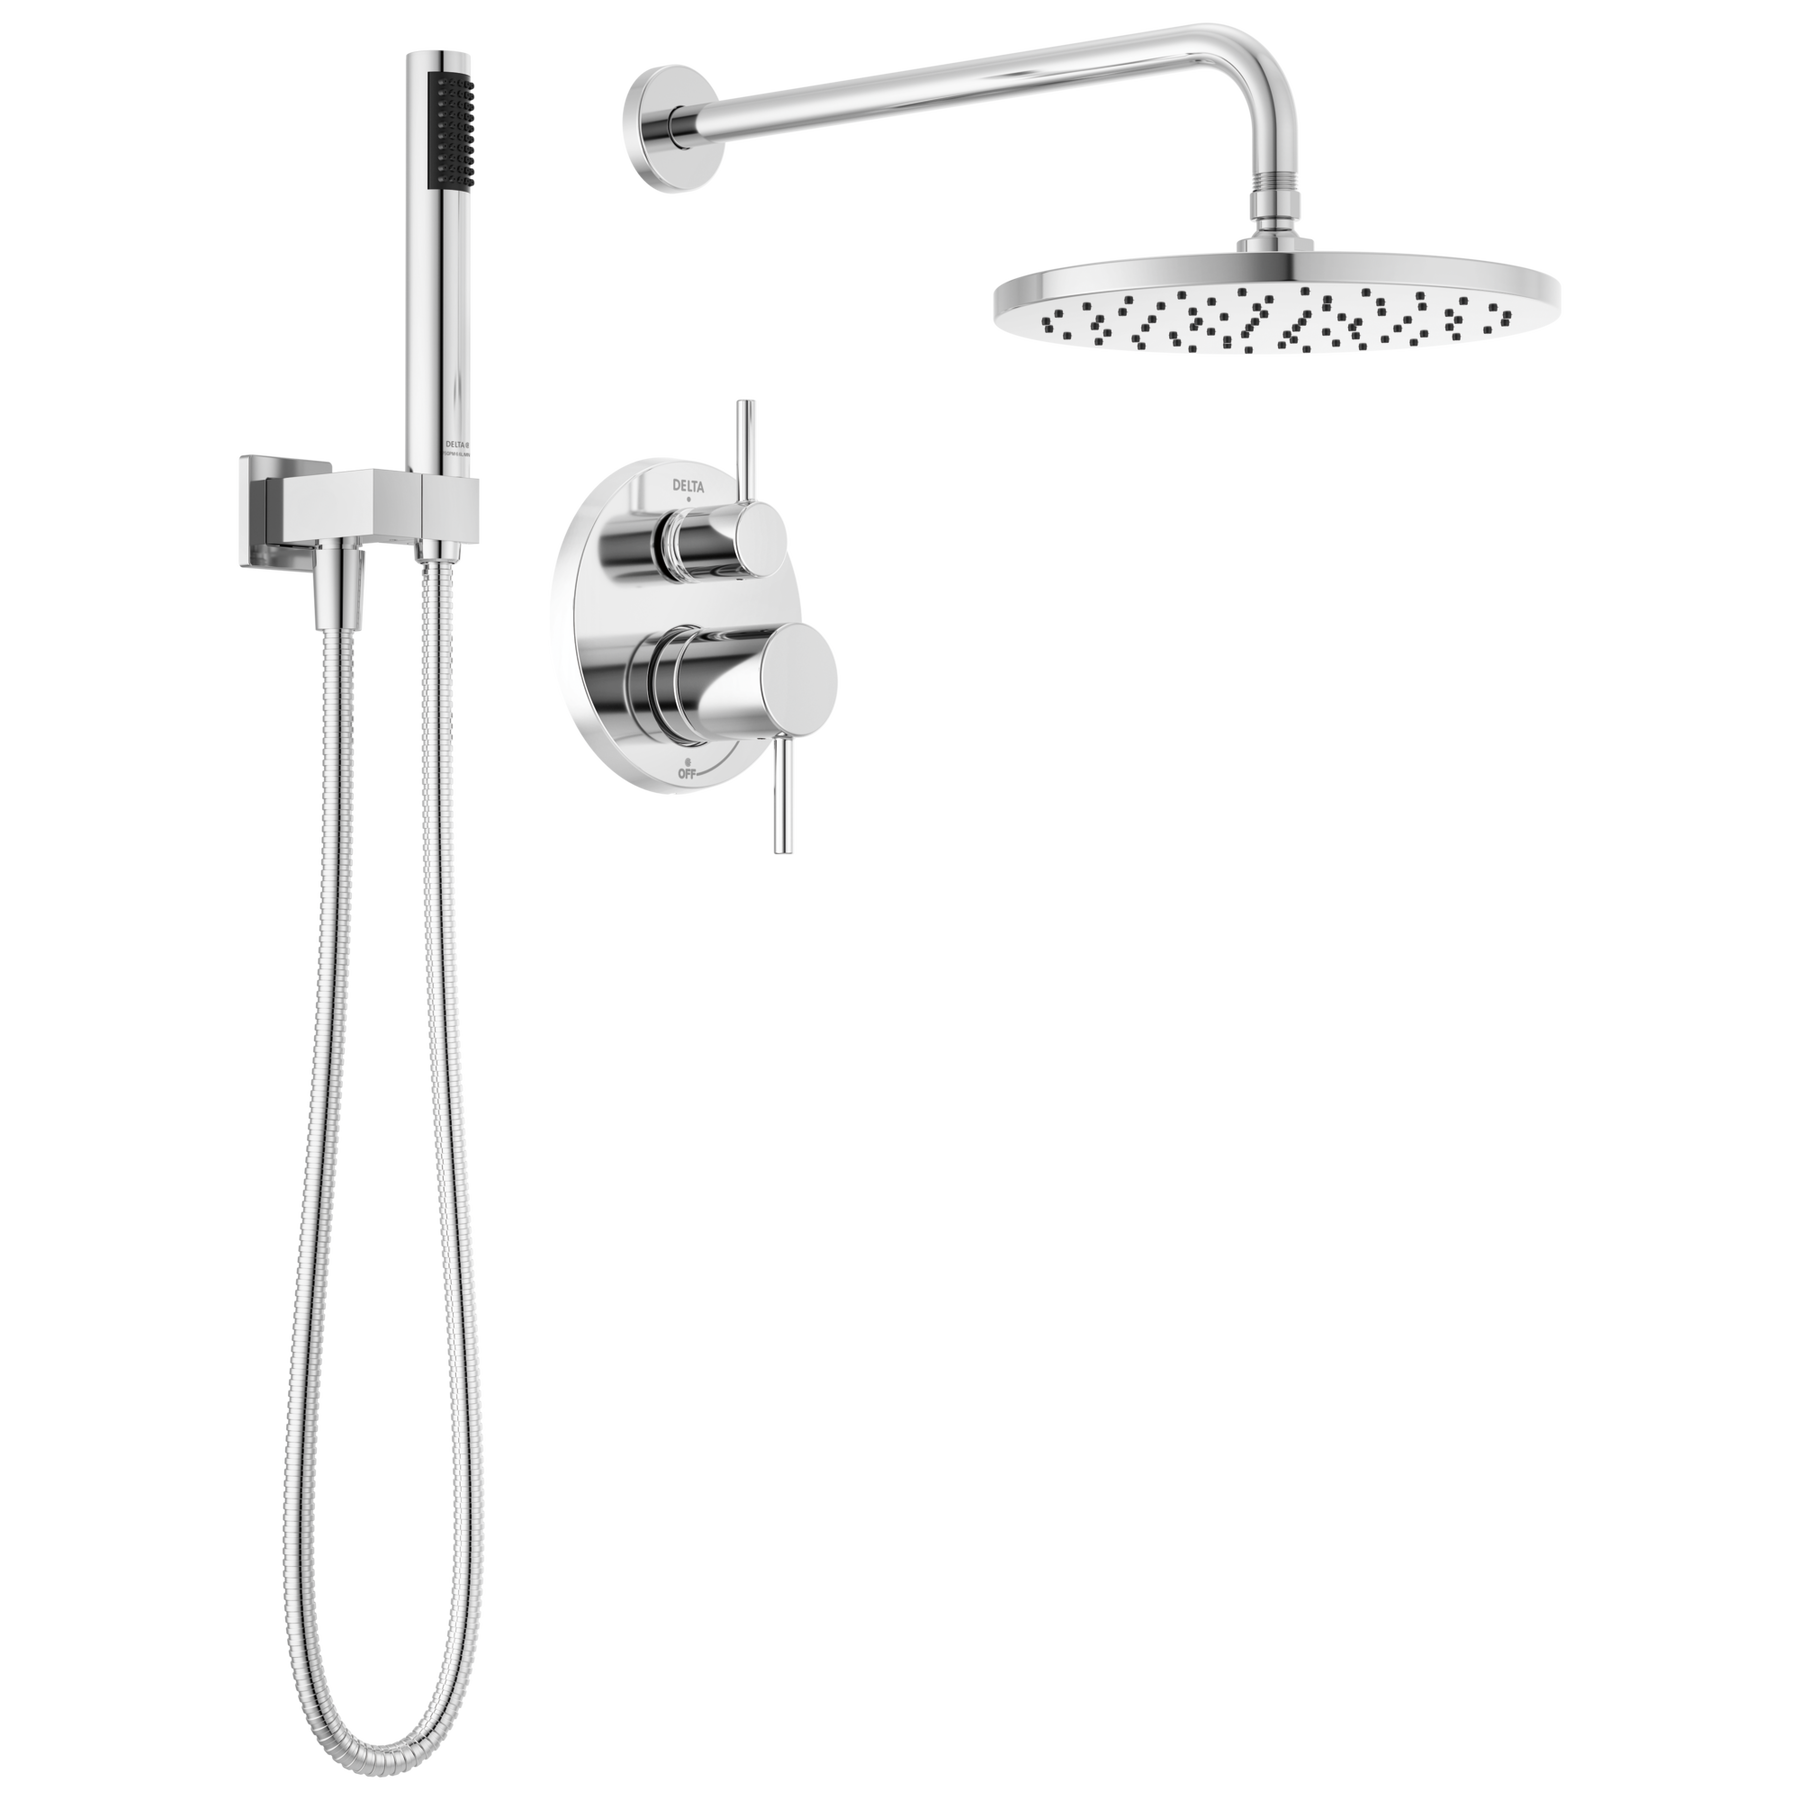 Monitor® 14 Series Shower with Raincan, Hand Shower & Rough Valve in Chrome  342702